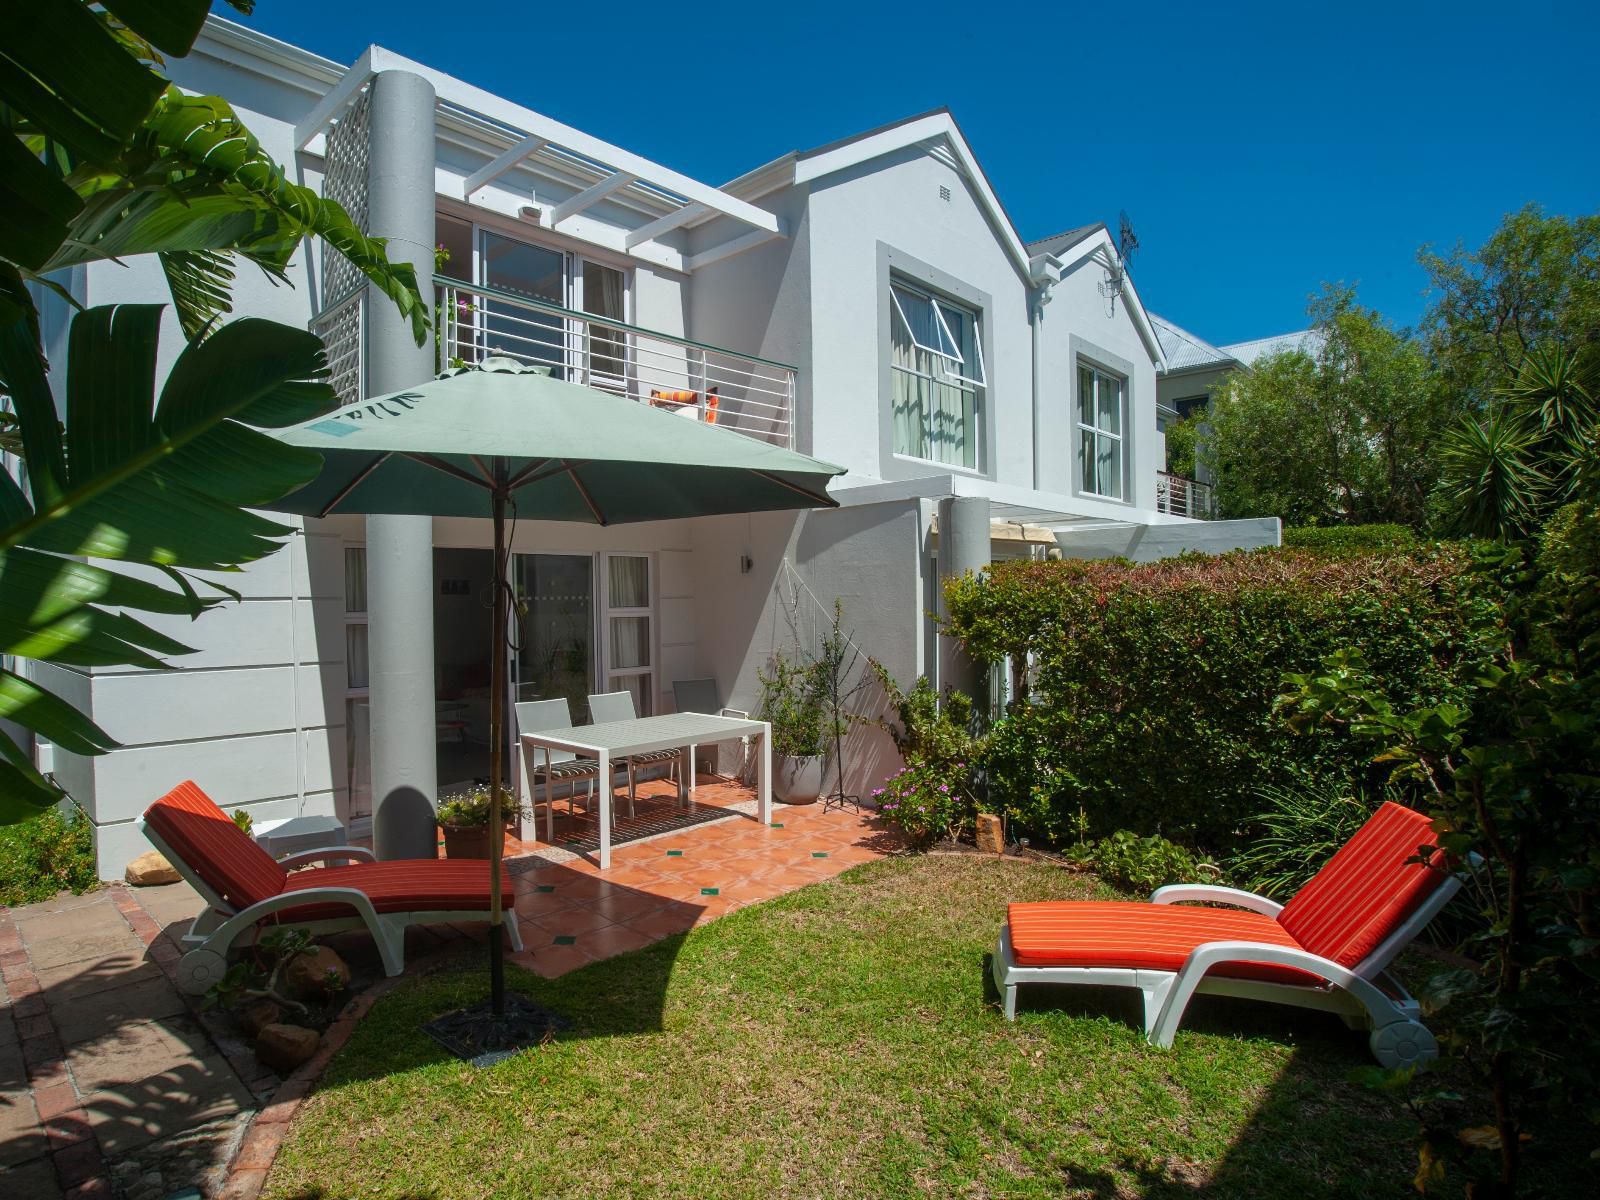 Village Self Catering Apartments Scott Estate Cape Town Western Cape South Africa House, Building, Architecture, Palm Tree, Plant, Nature, Wood, Swimming Pool